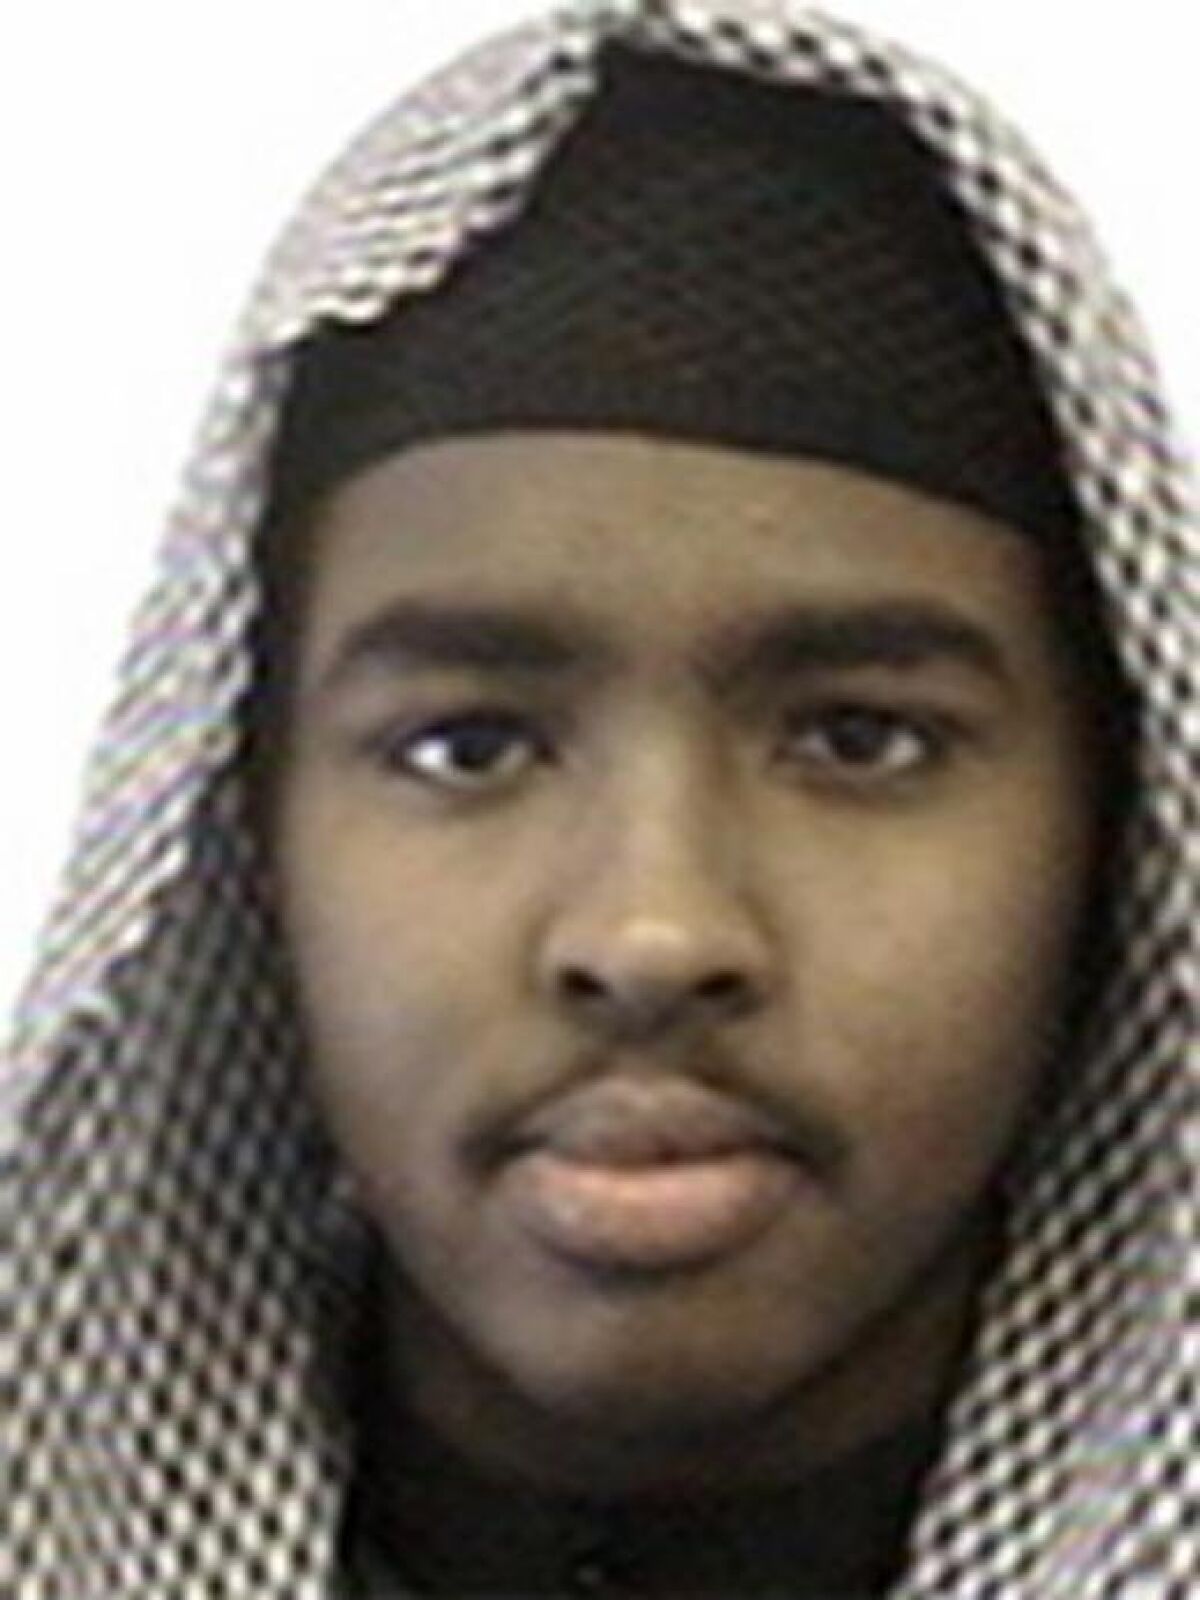 This undated photo provided by the FBI shows Mohamed Abdullahi Hassan, who turned himself in to authorities in Africa, the U.S. State Department said Monday, Dec. 7, 2015. A former Minnesota resident, Hassan joined al-Shabab in Somalia more than seven years ago and more recently went online to urge others to carry out violence on behalf of the Islamic State group, authorities said. (FBI via AP)